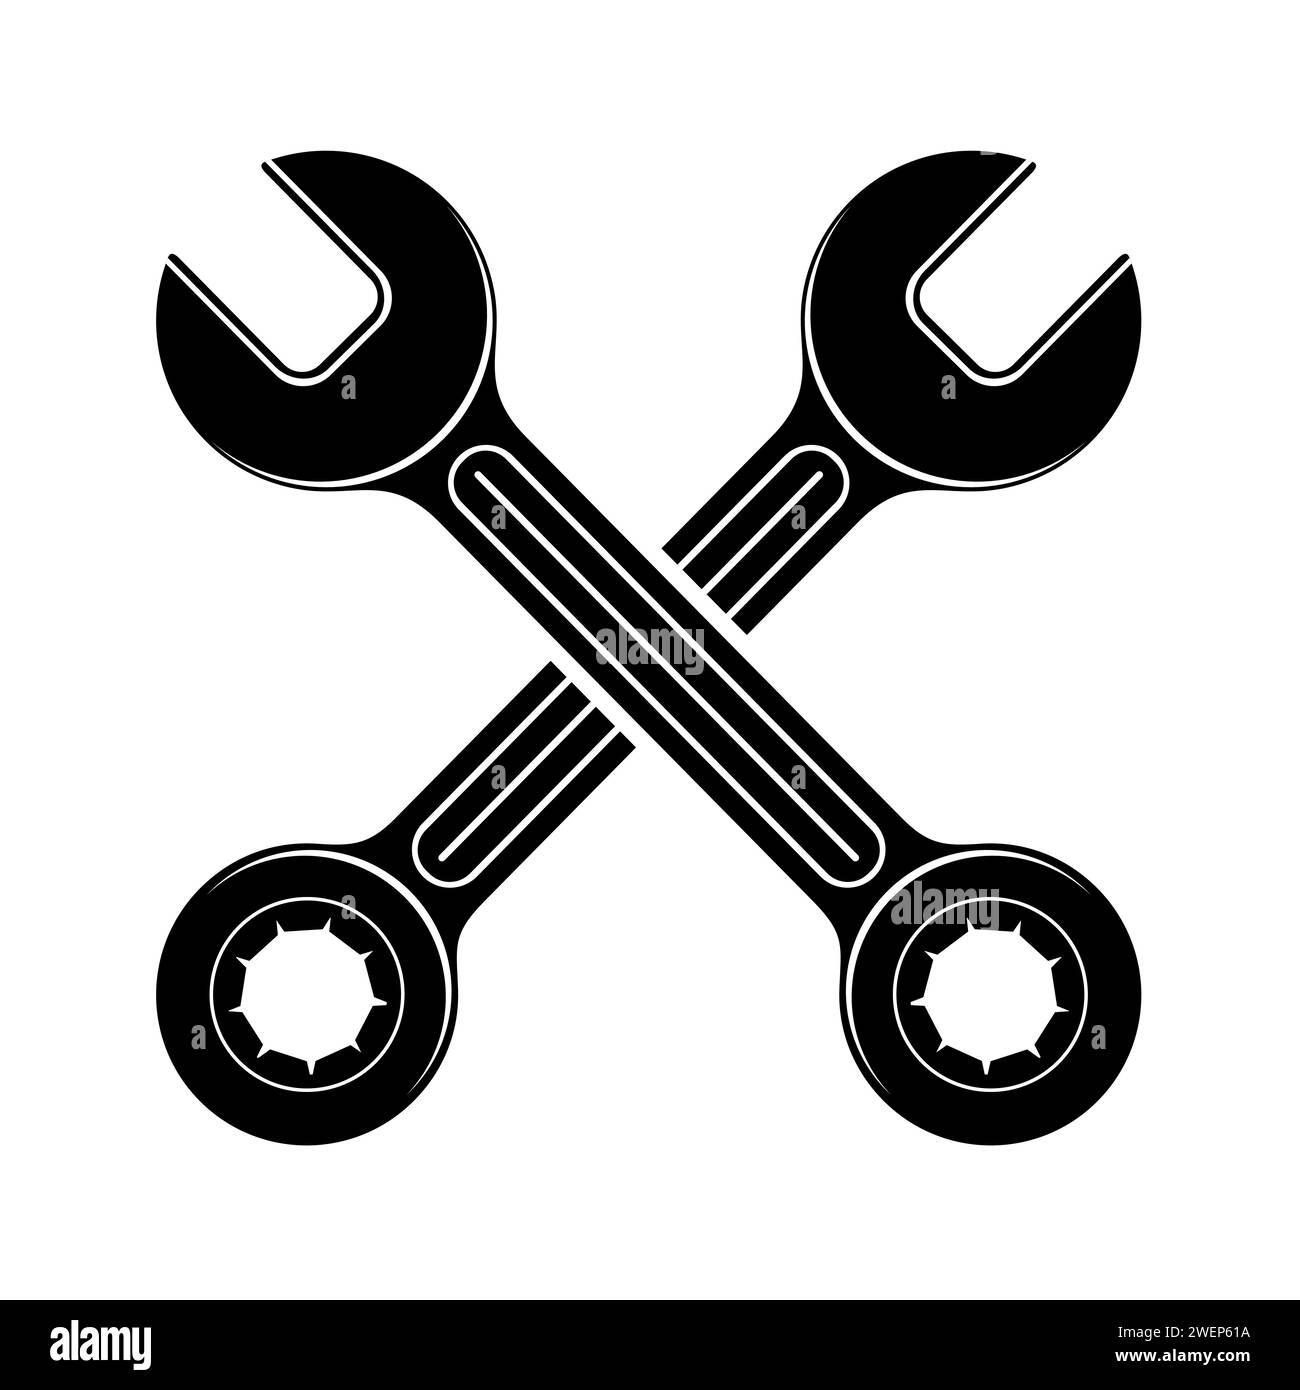 Black Crossed Wrenches Repair Service Icon Stock Vector Image And Art Alamy